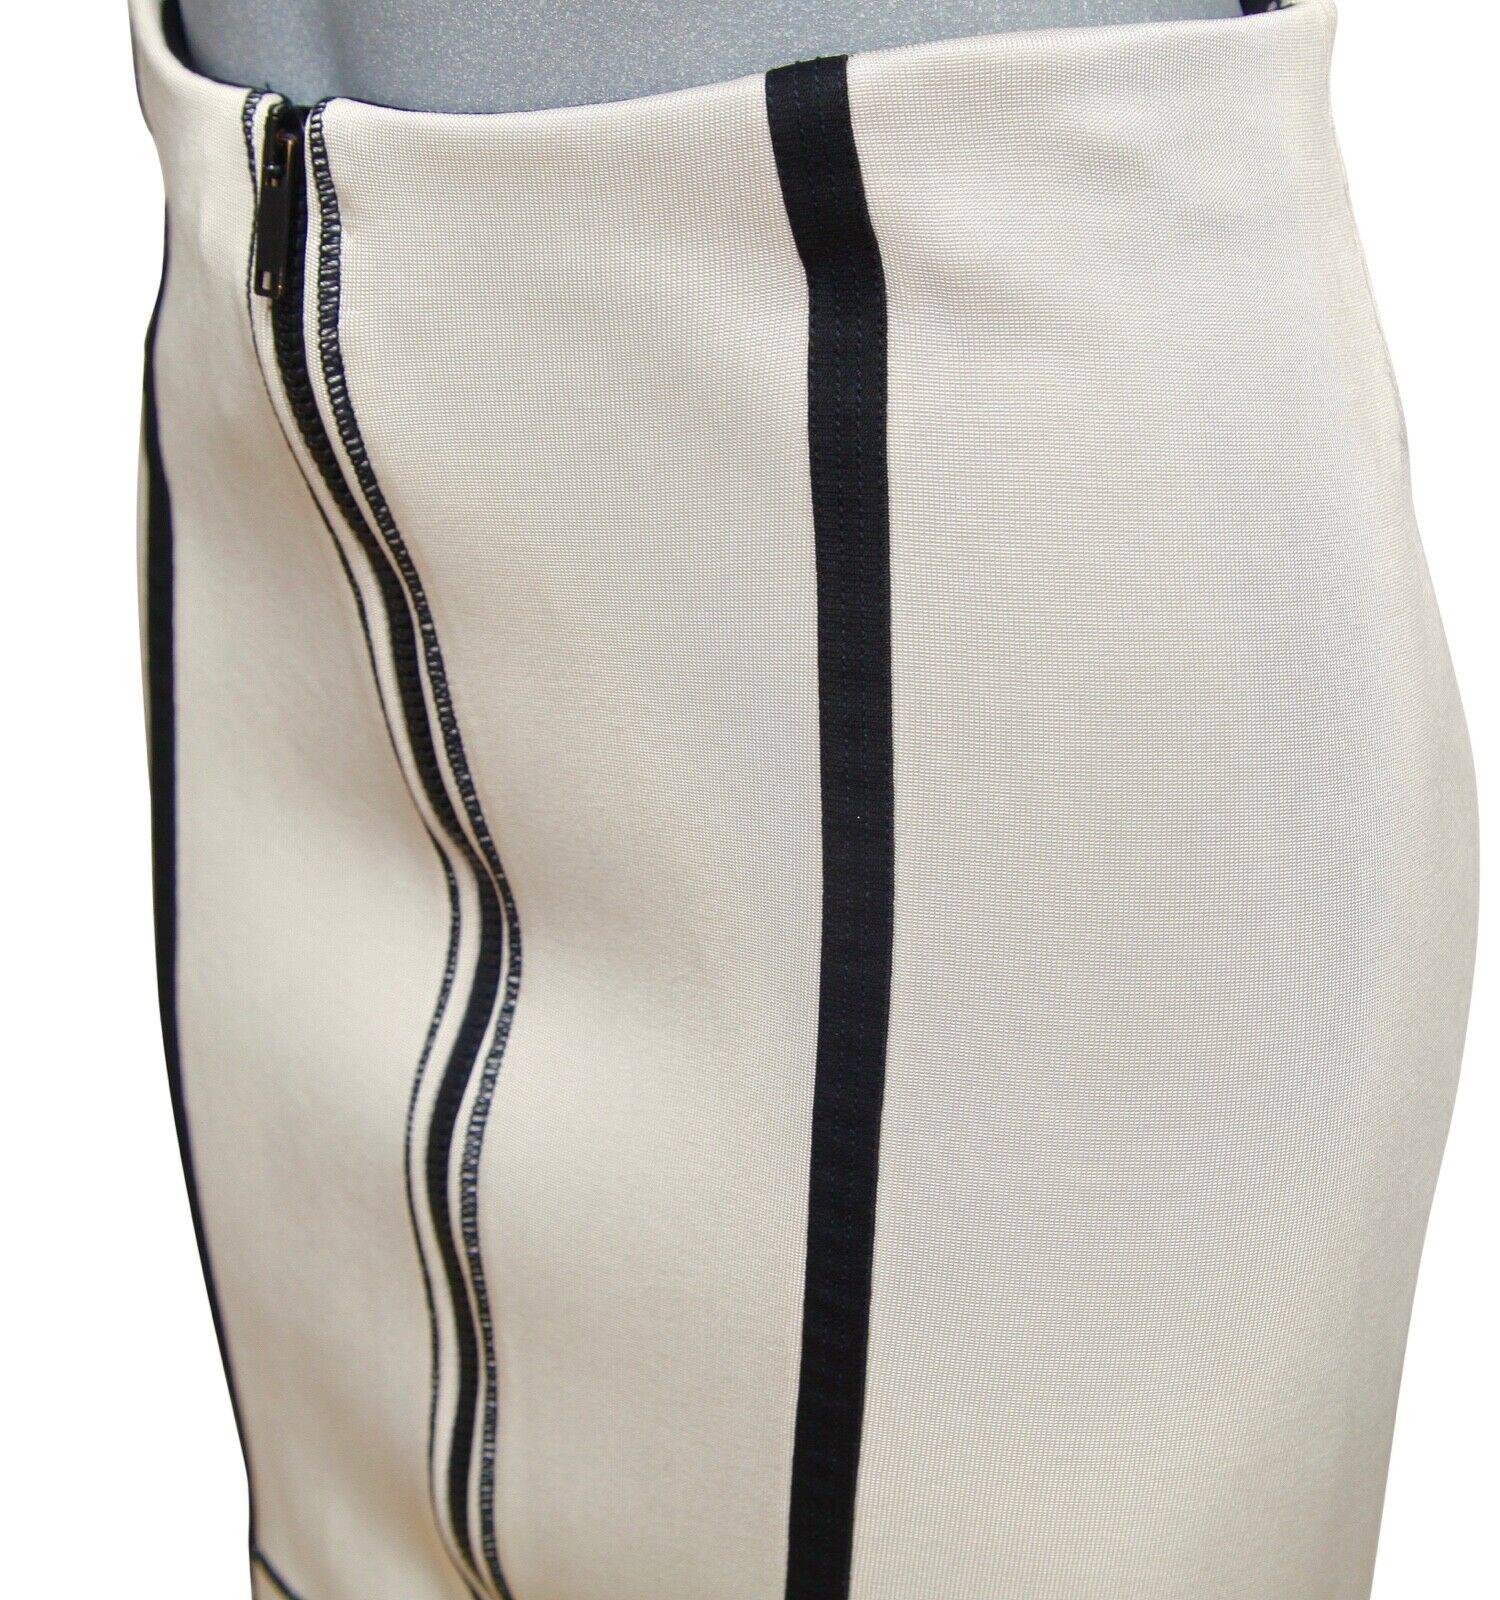 GUCCI Pencil Skirt Bodycon Viscose Zipper Ivory Black Sz 40 In Good Condition For Sale In Hollywood, FL